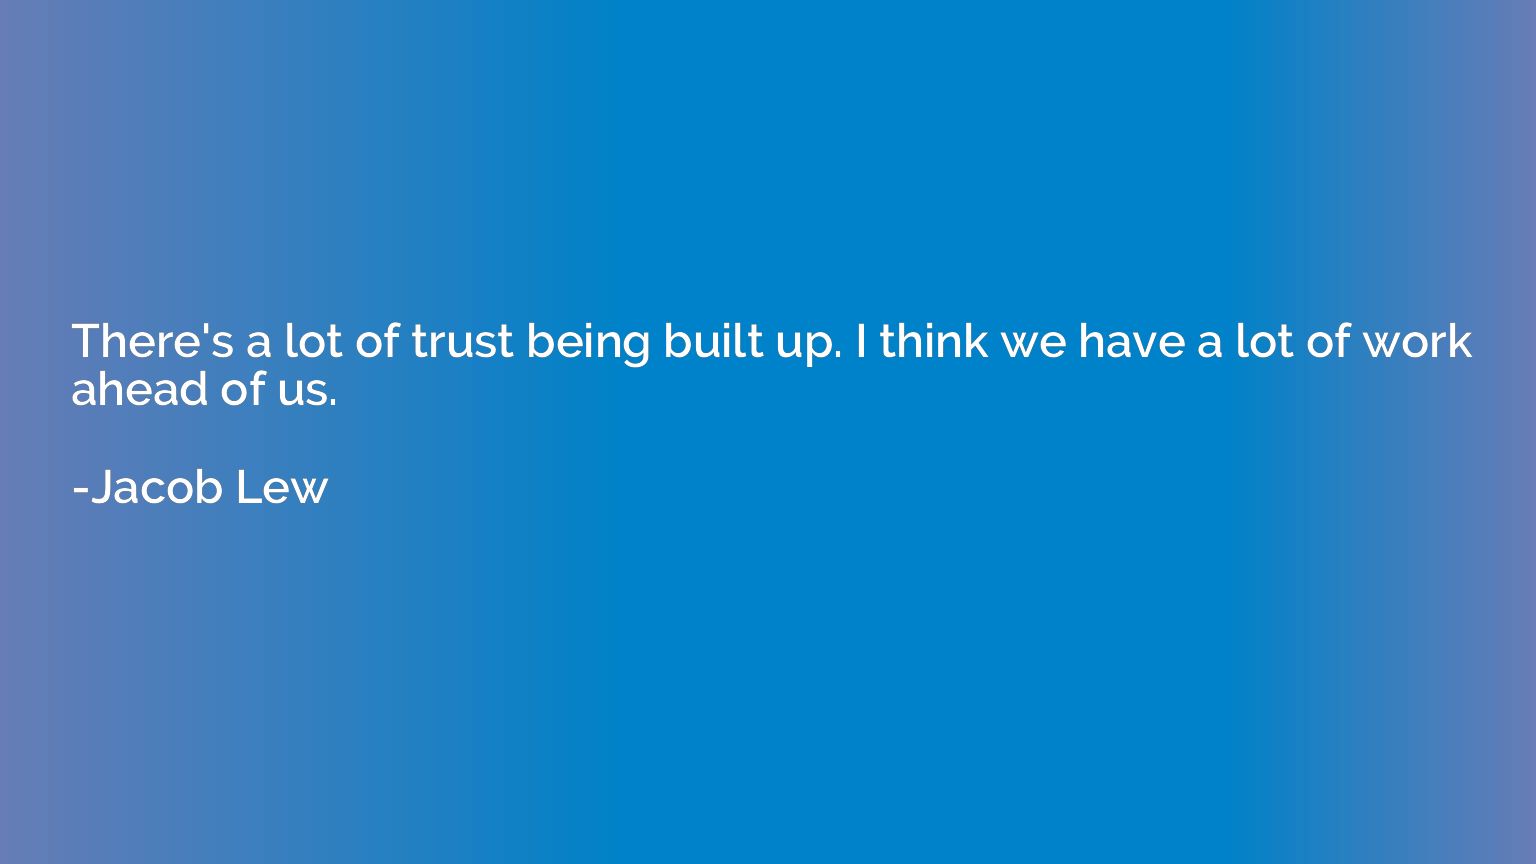 There's a lot of trust being built up. I think we have a lot